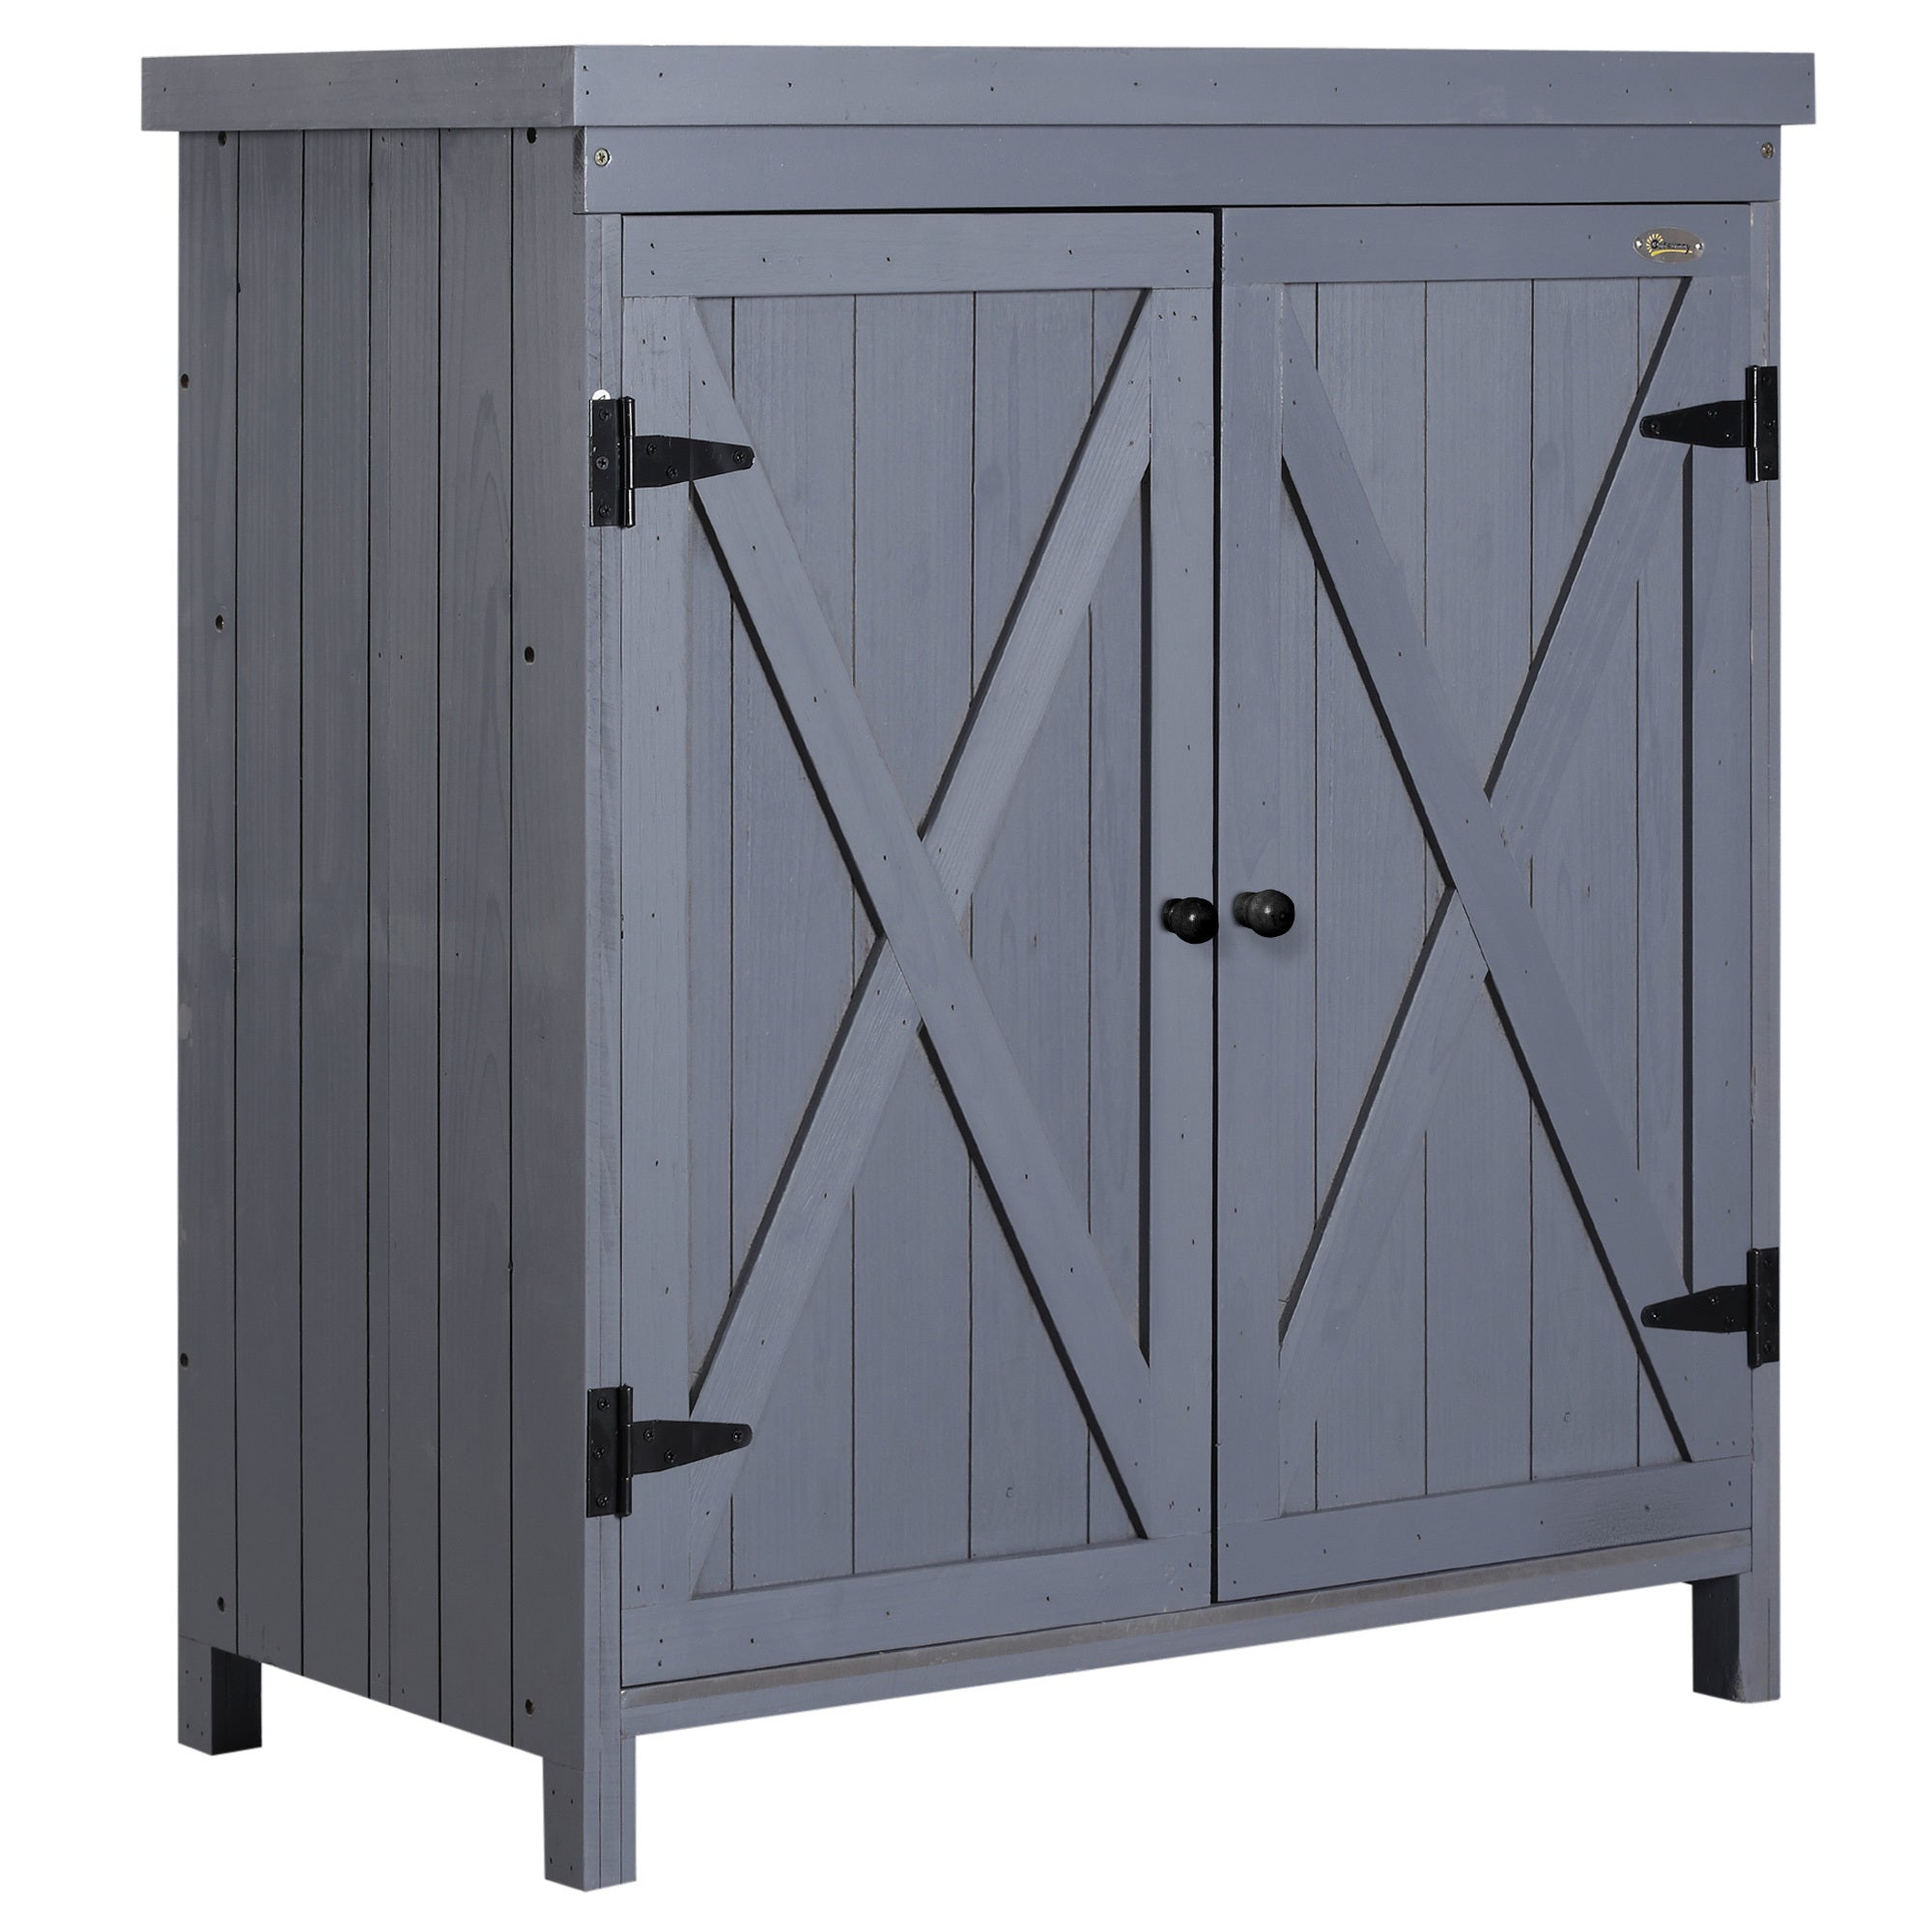 Garden Storage Cabinet, Outdoor Tool Shed with